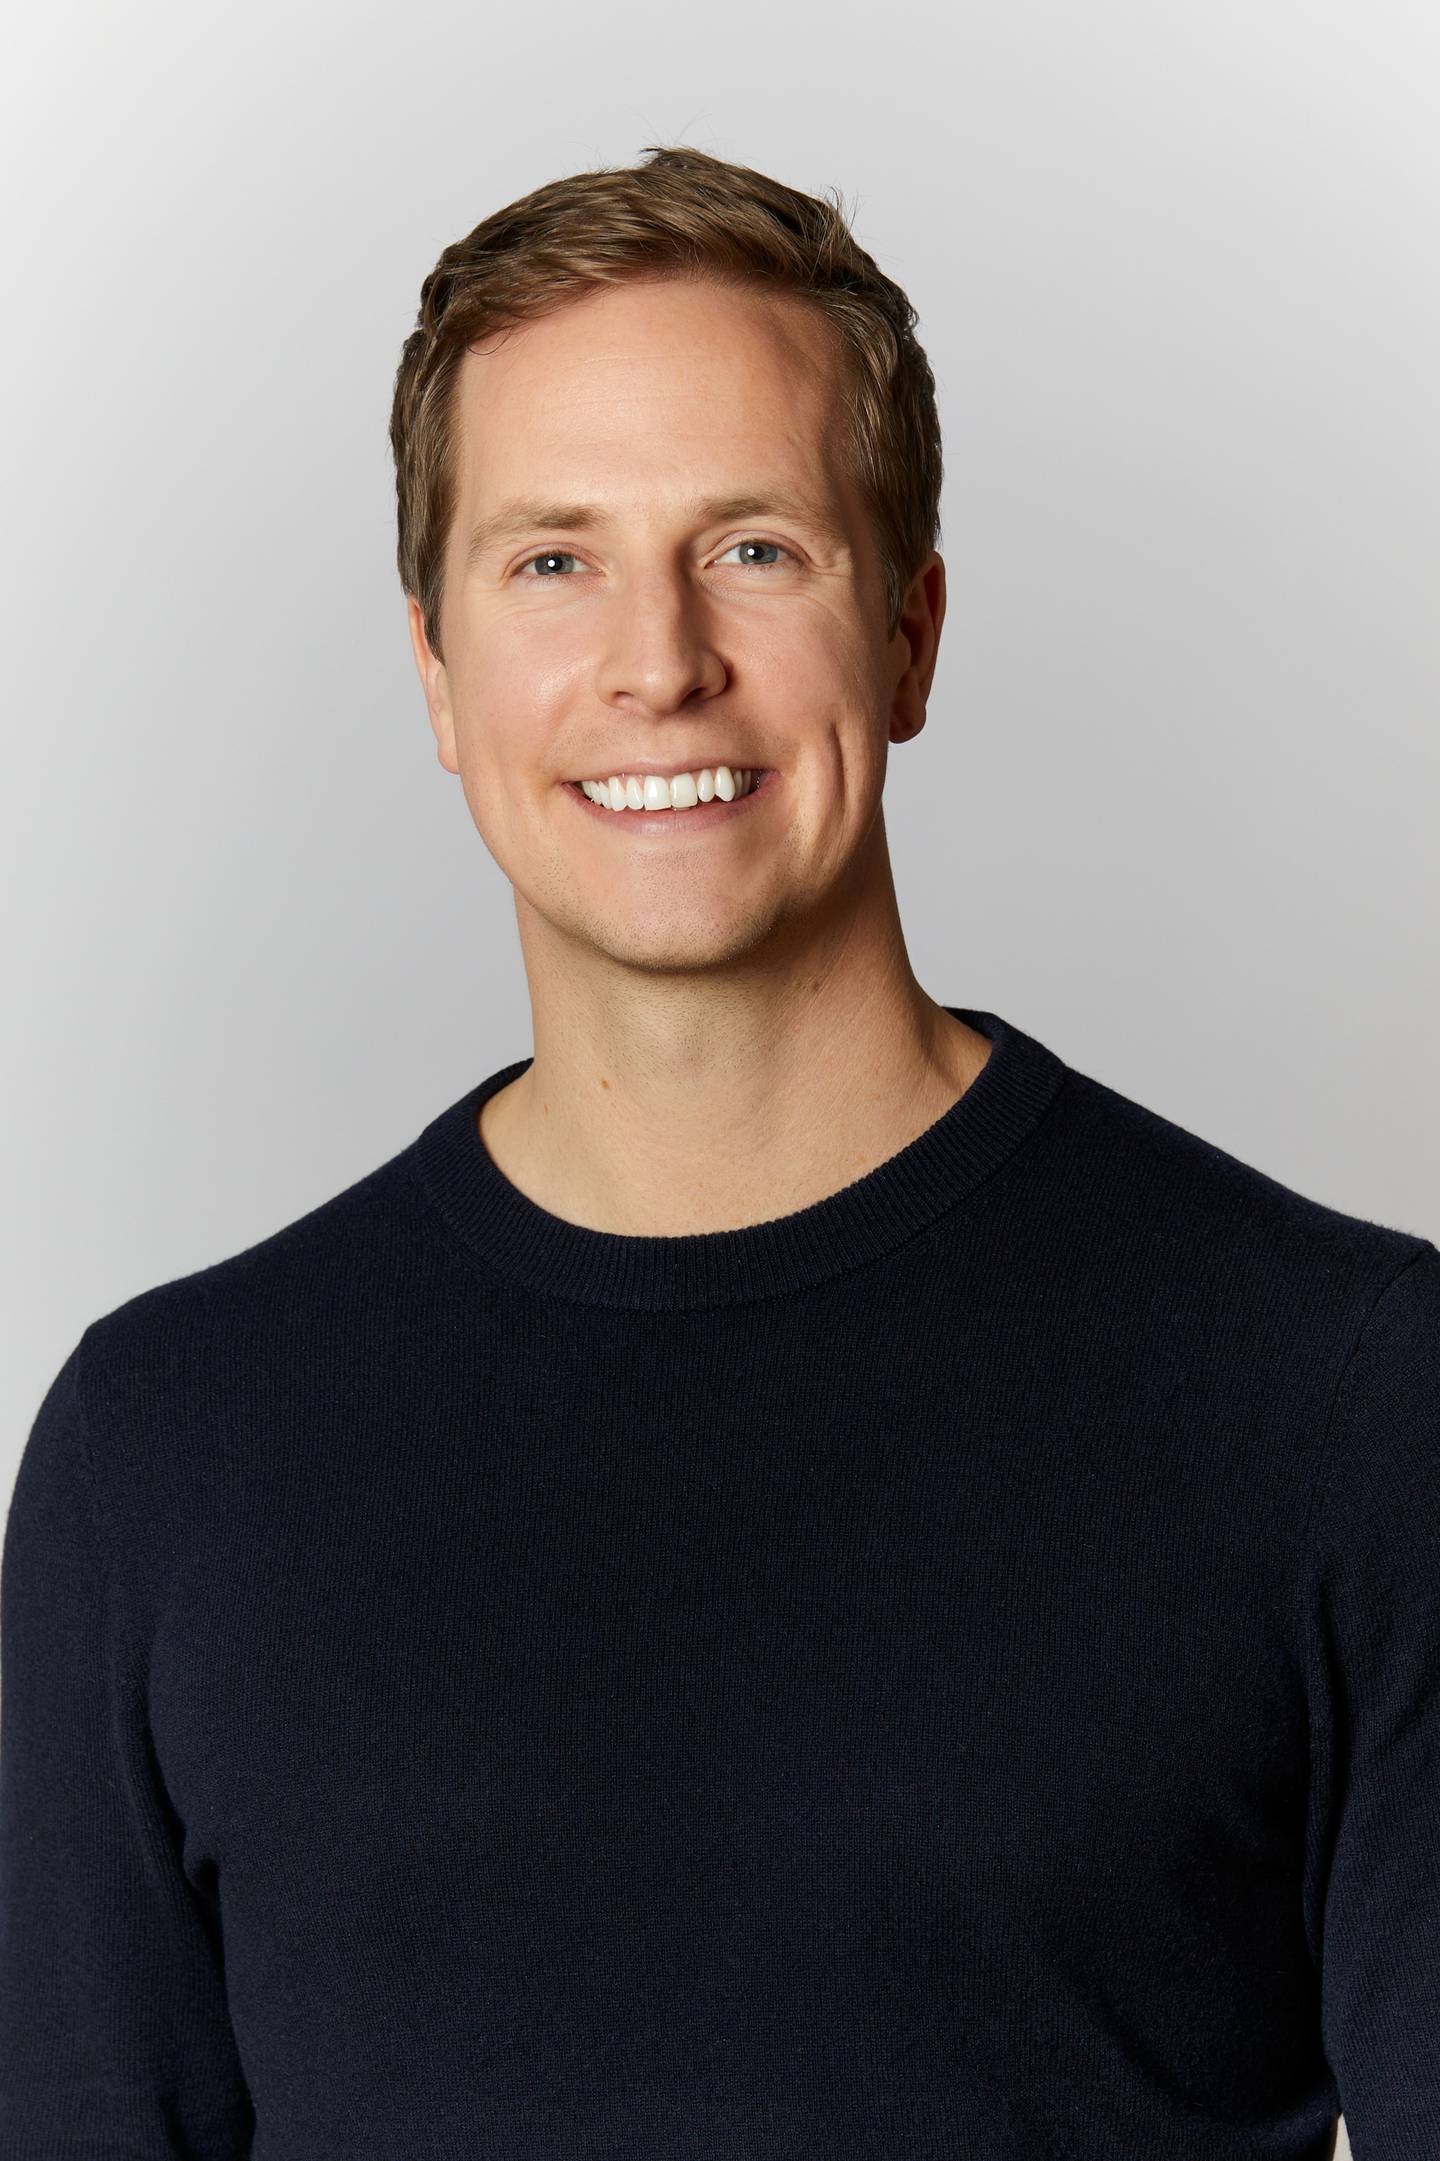 Evan Smith is the co-founder and chief executive of Altana Technologies.